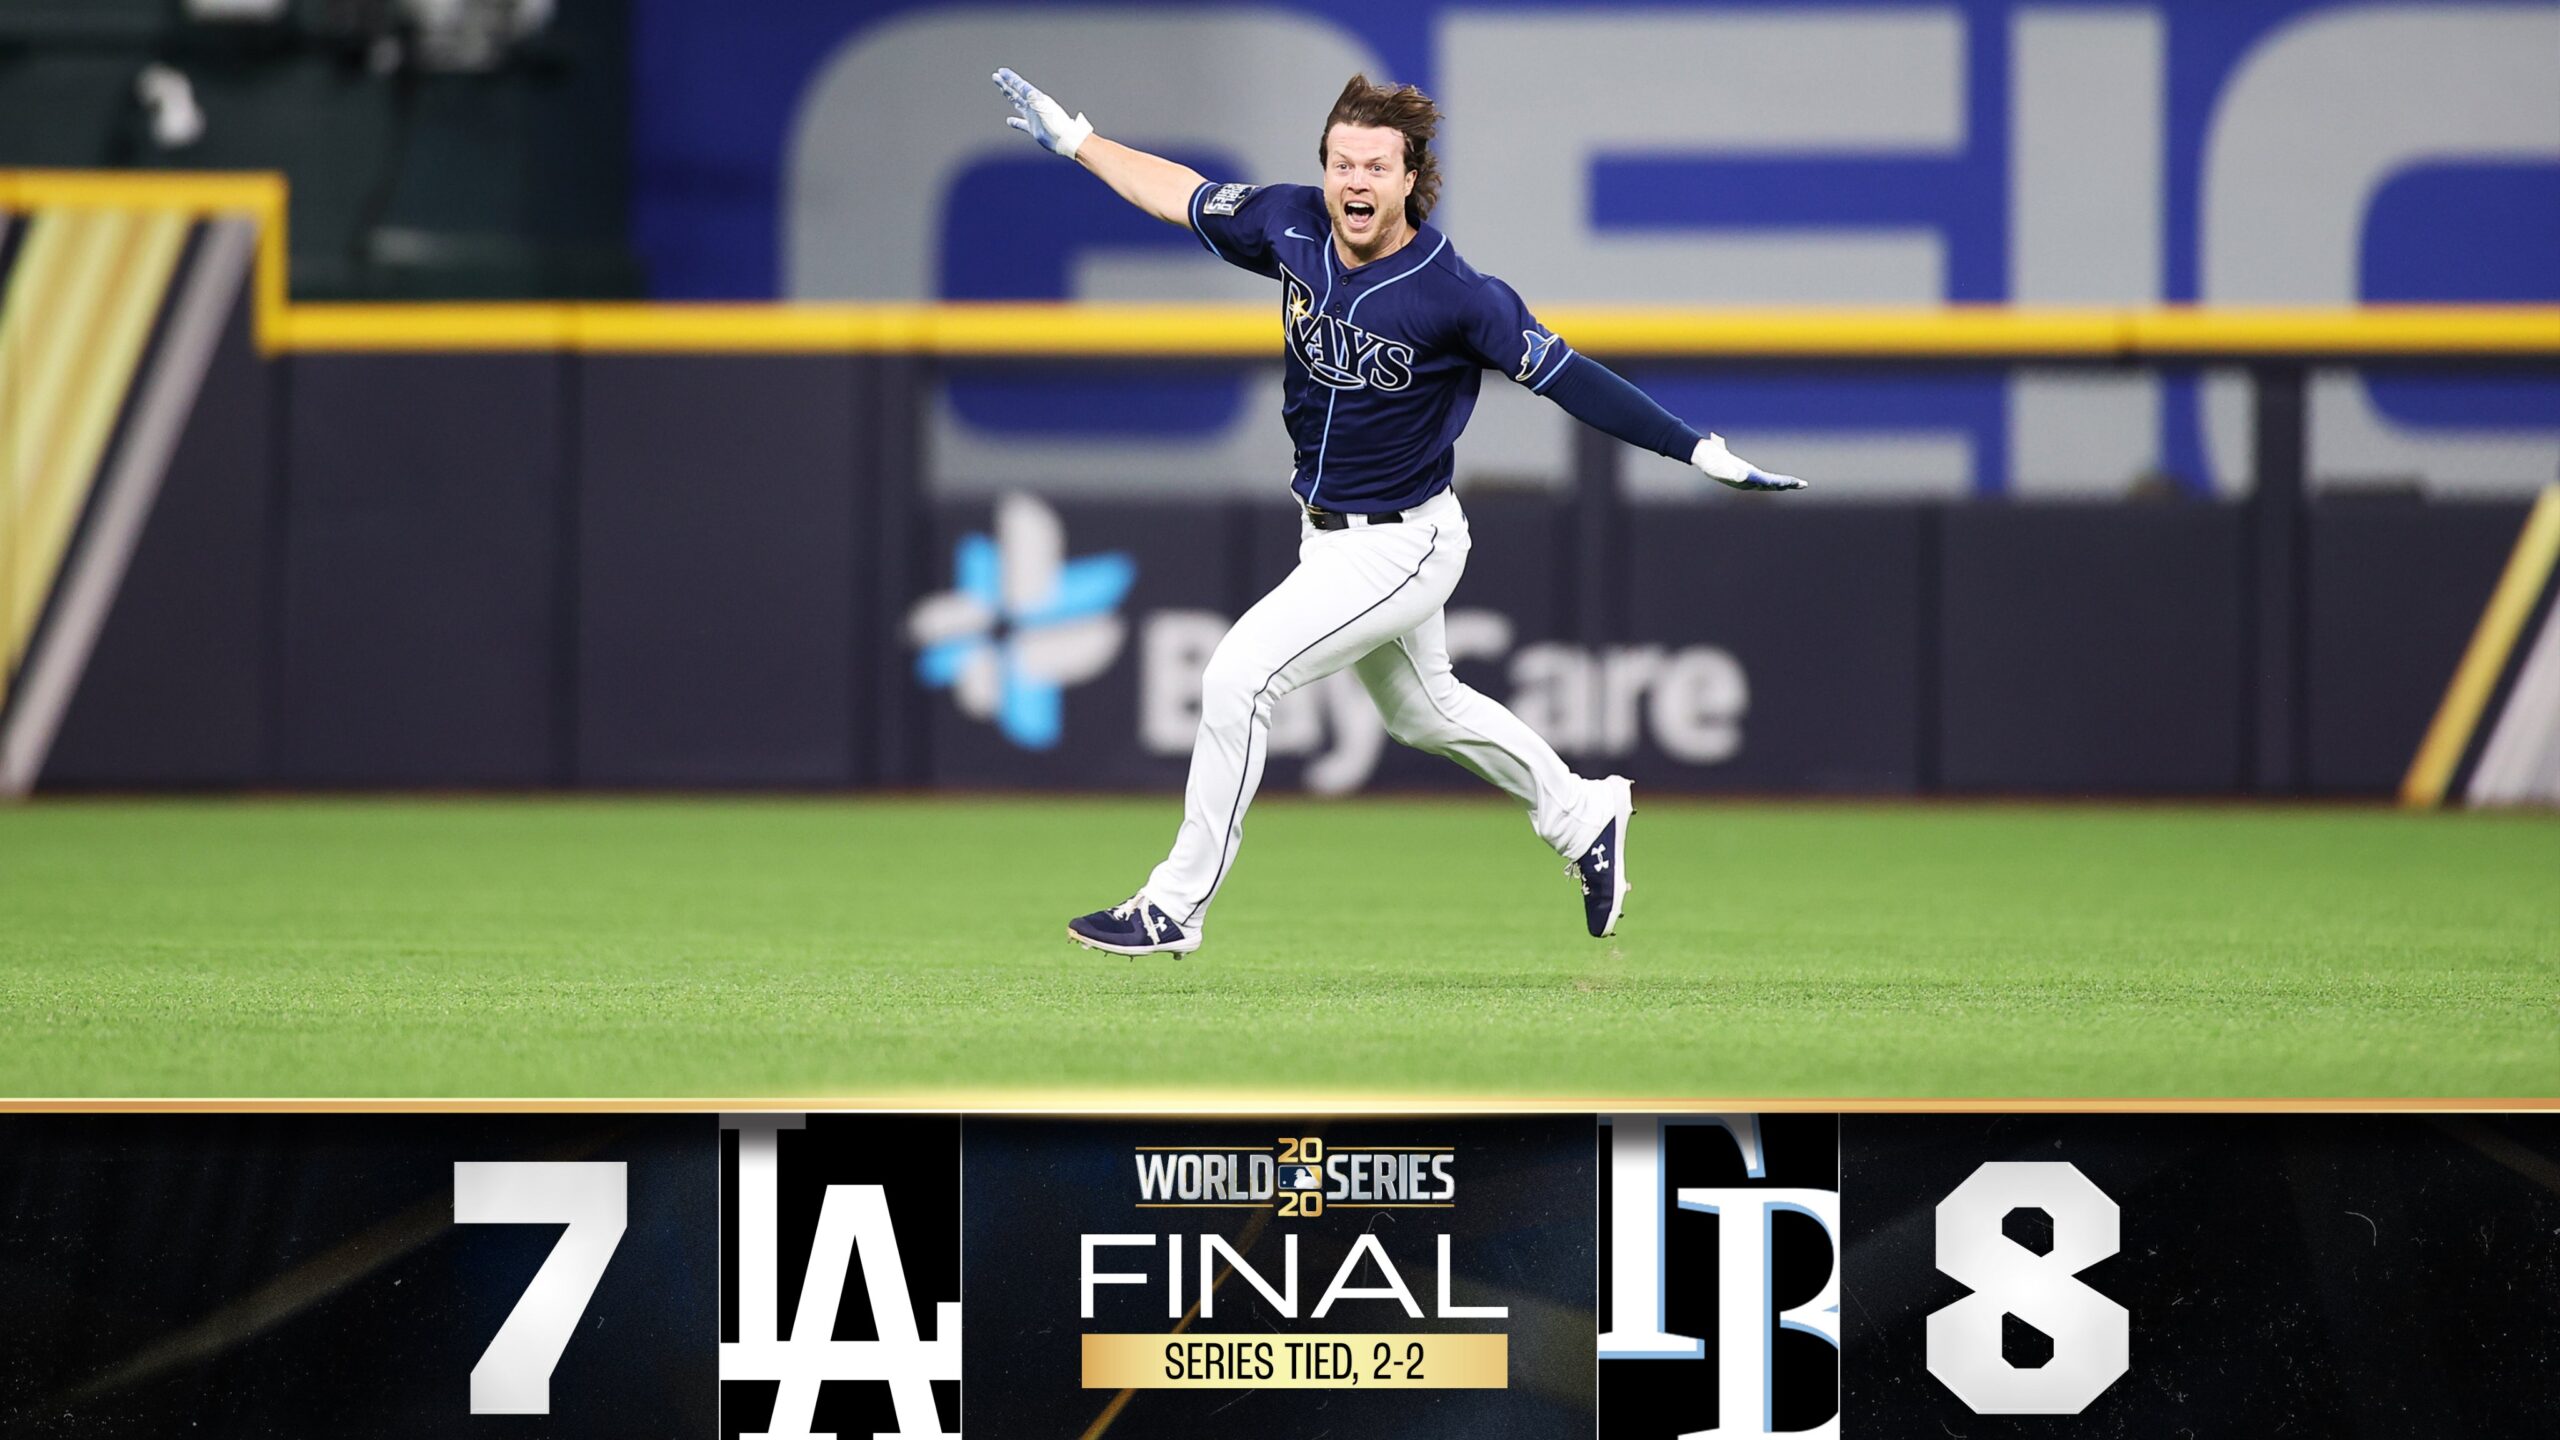 Rays win Game 4 and ties World Series at 2-2